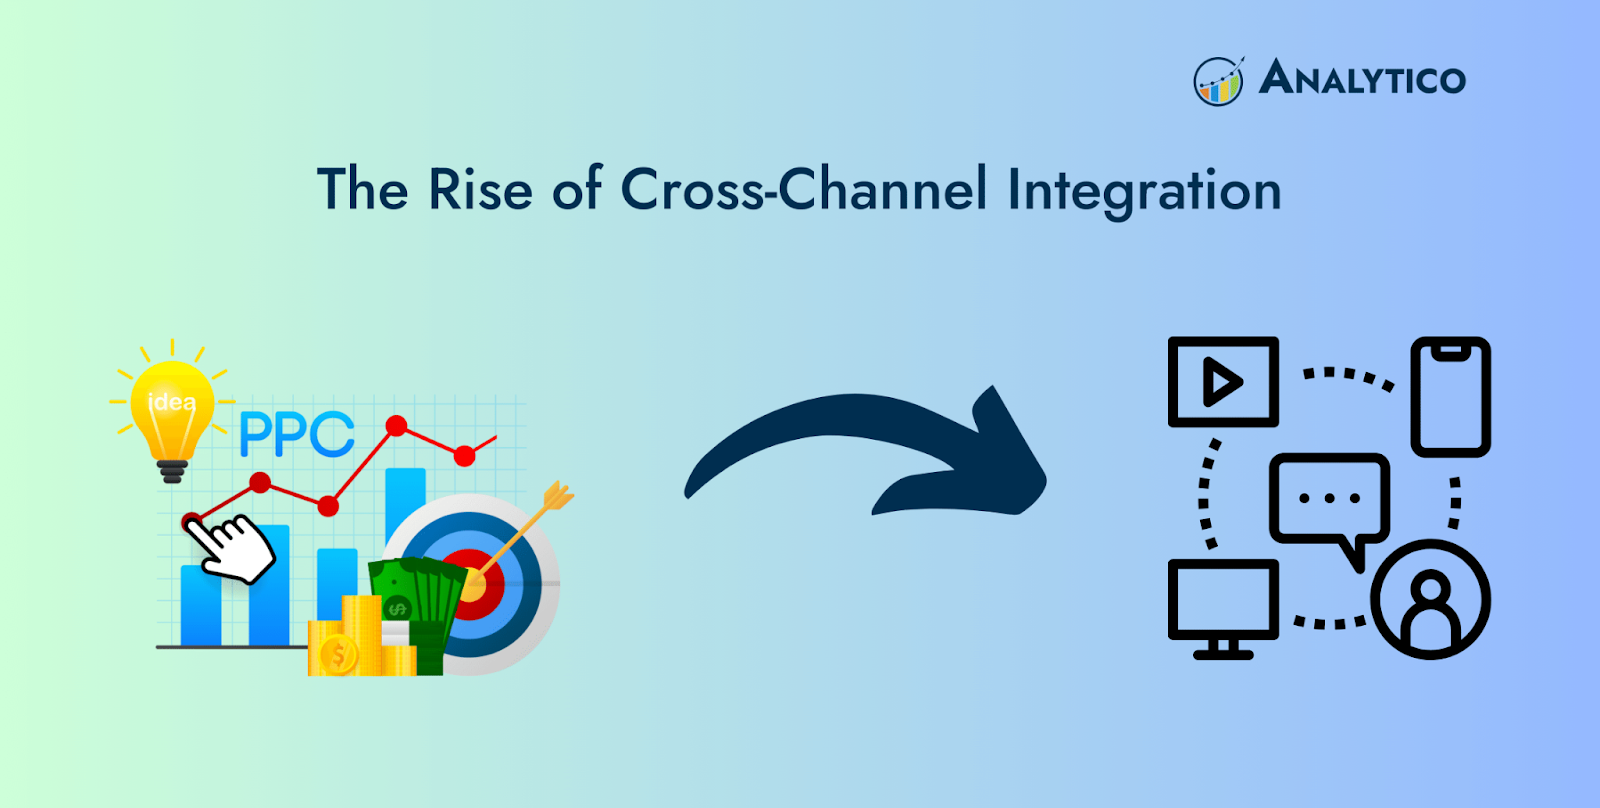 The Rise of Cross-Channel Integration